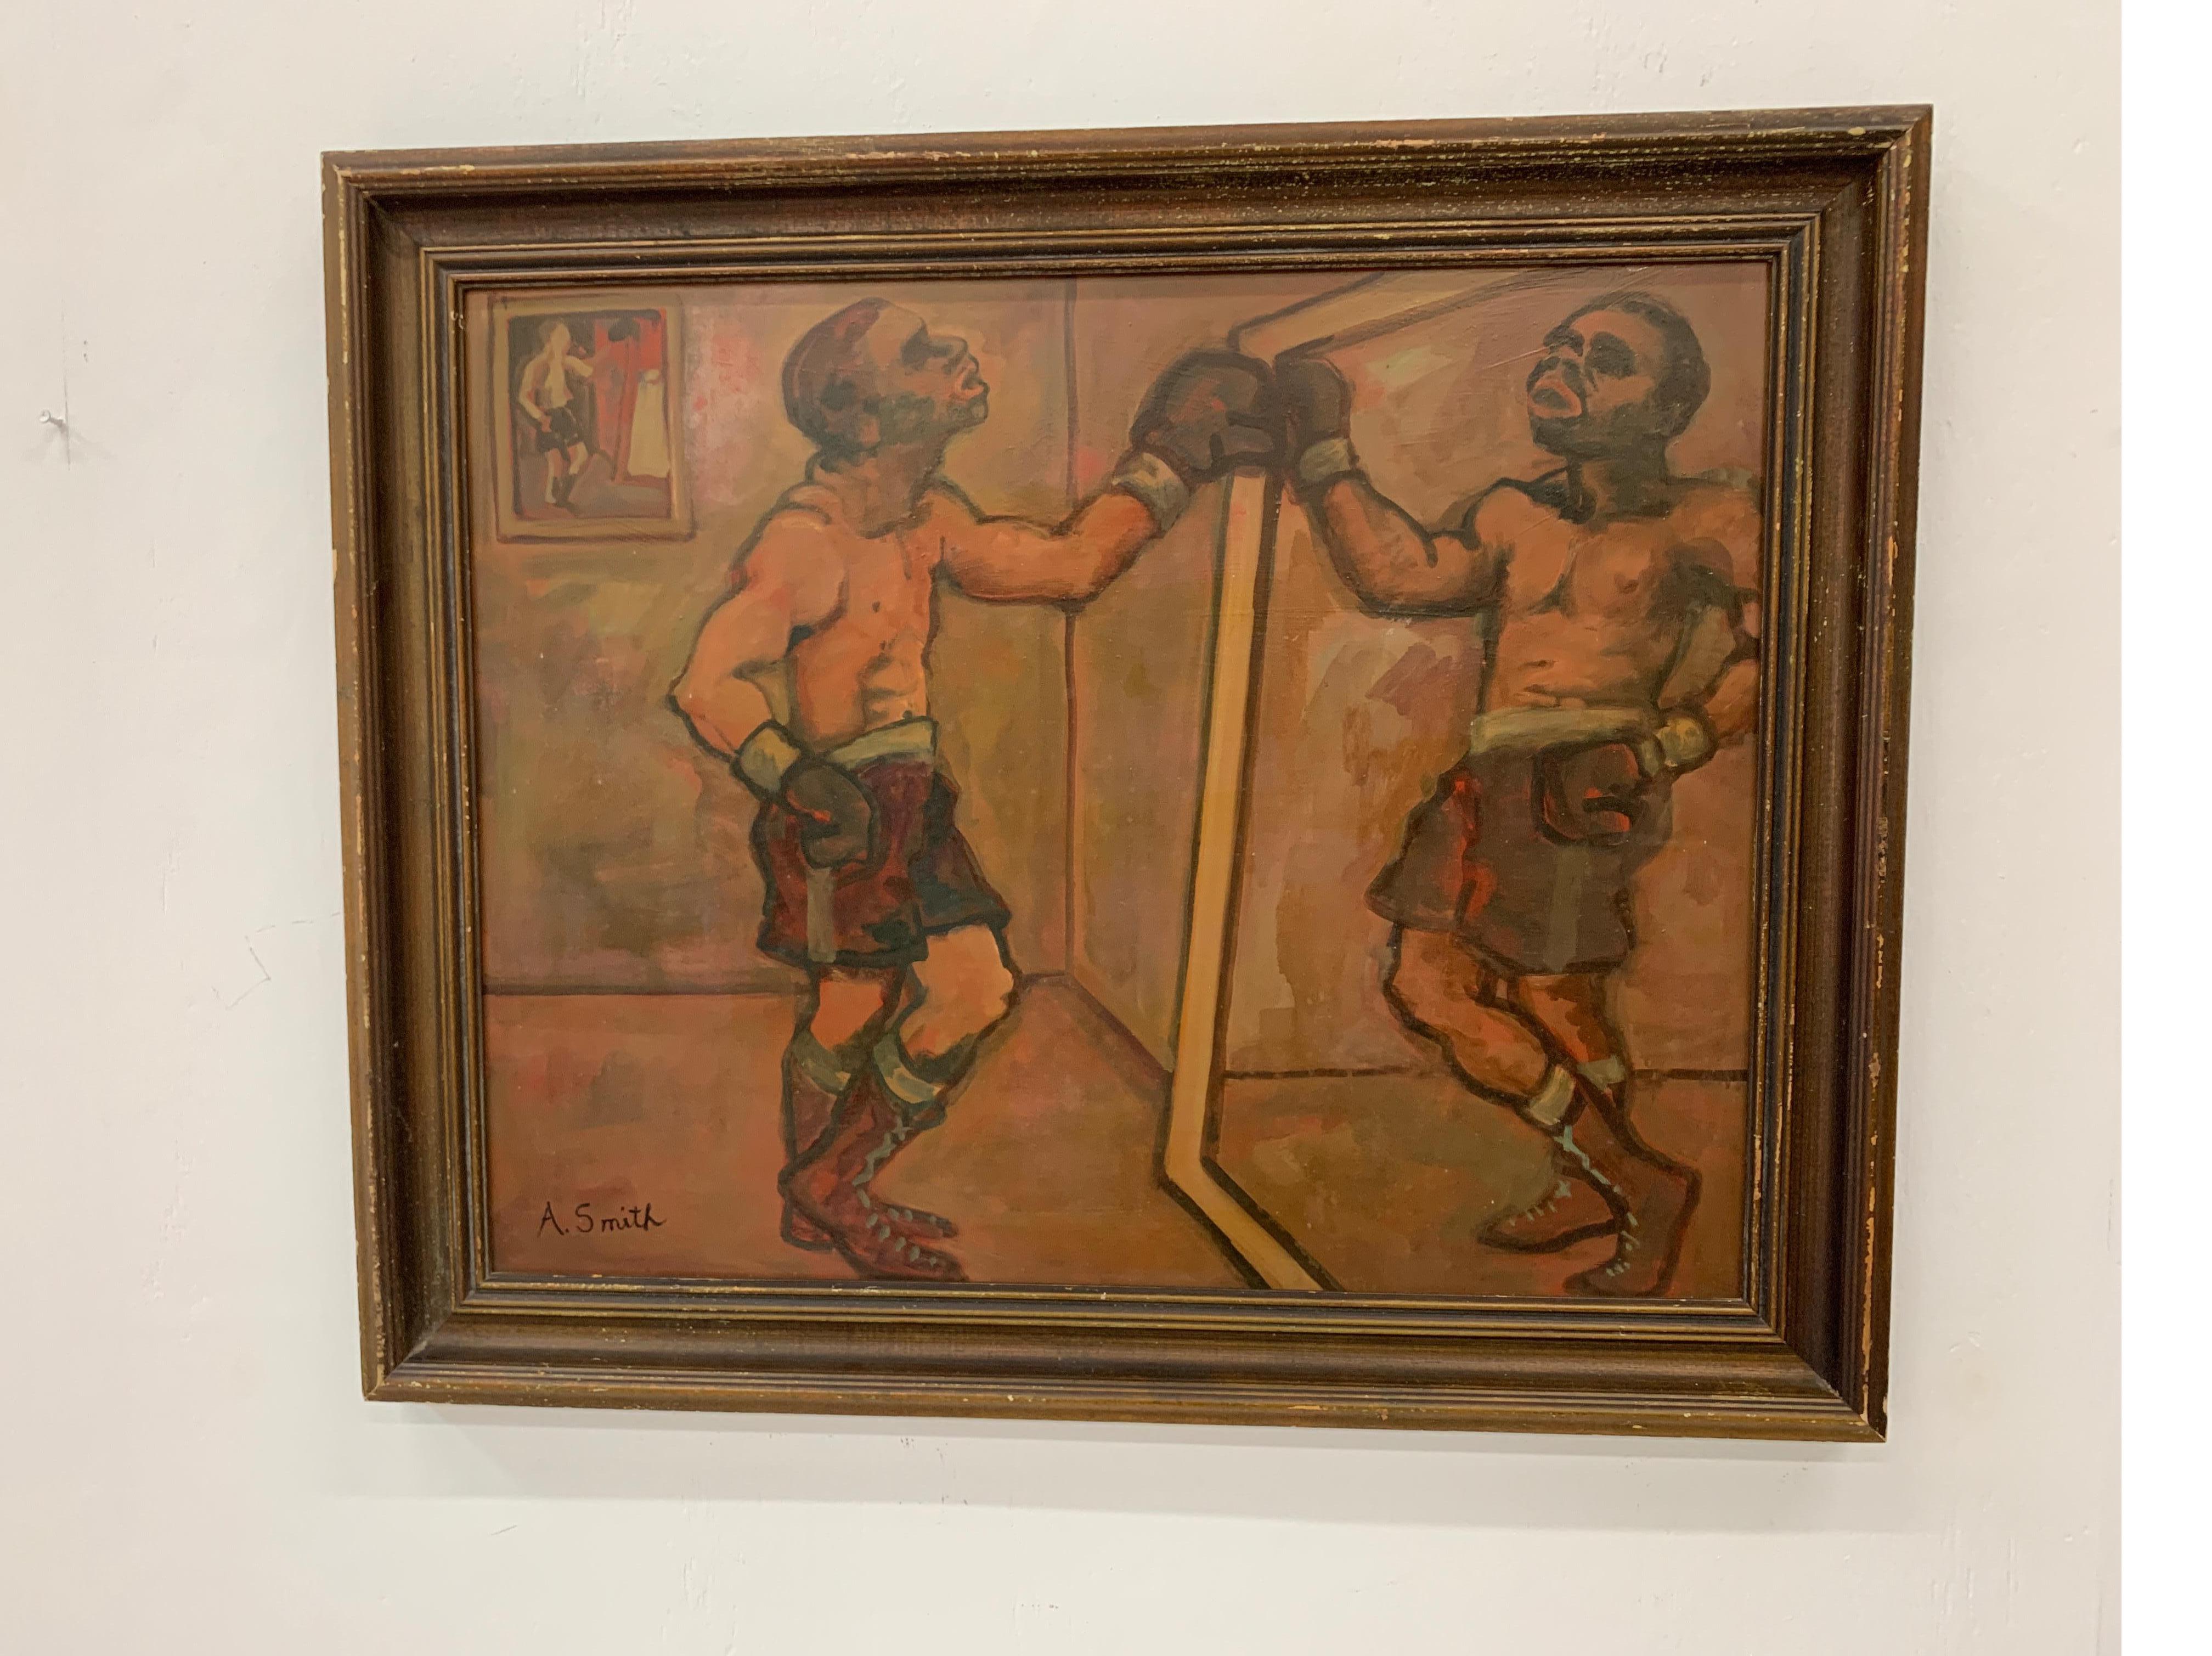 Large oil on board circa 1940 by listed artist Arthur Smith (1897-1972) portraying a boxer in front of a mirror.